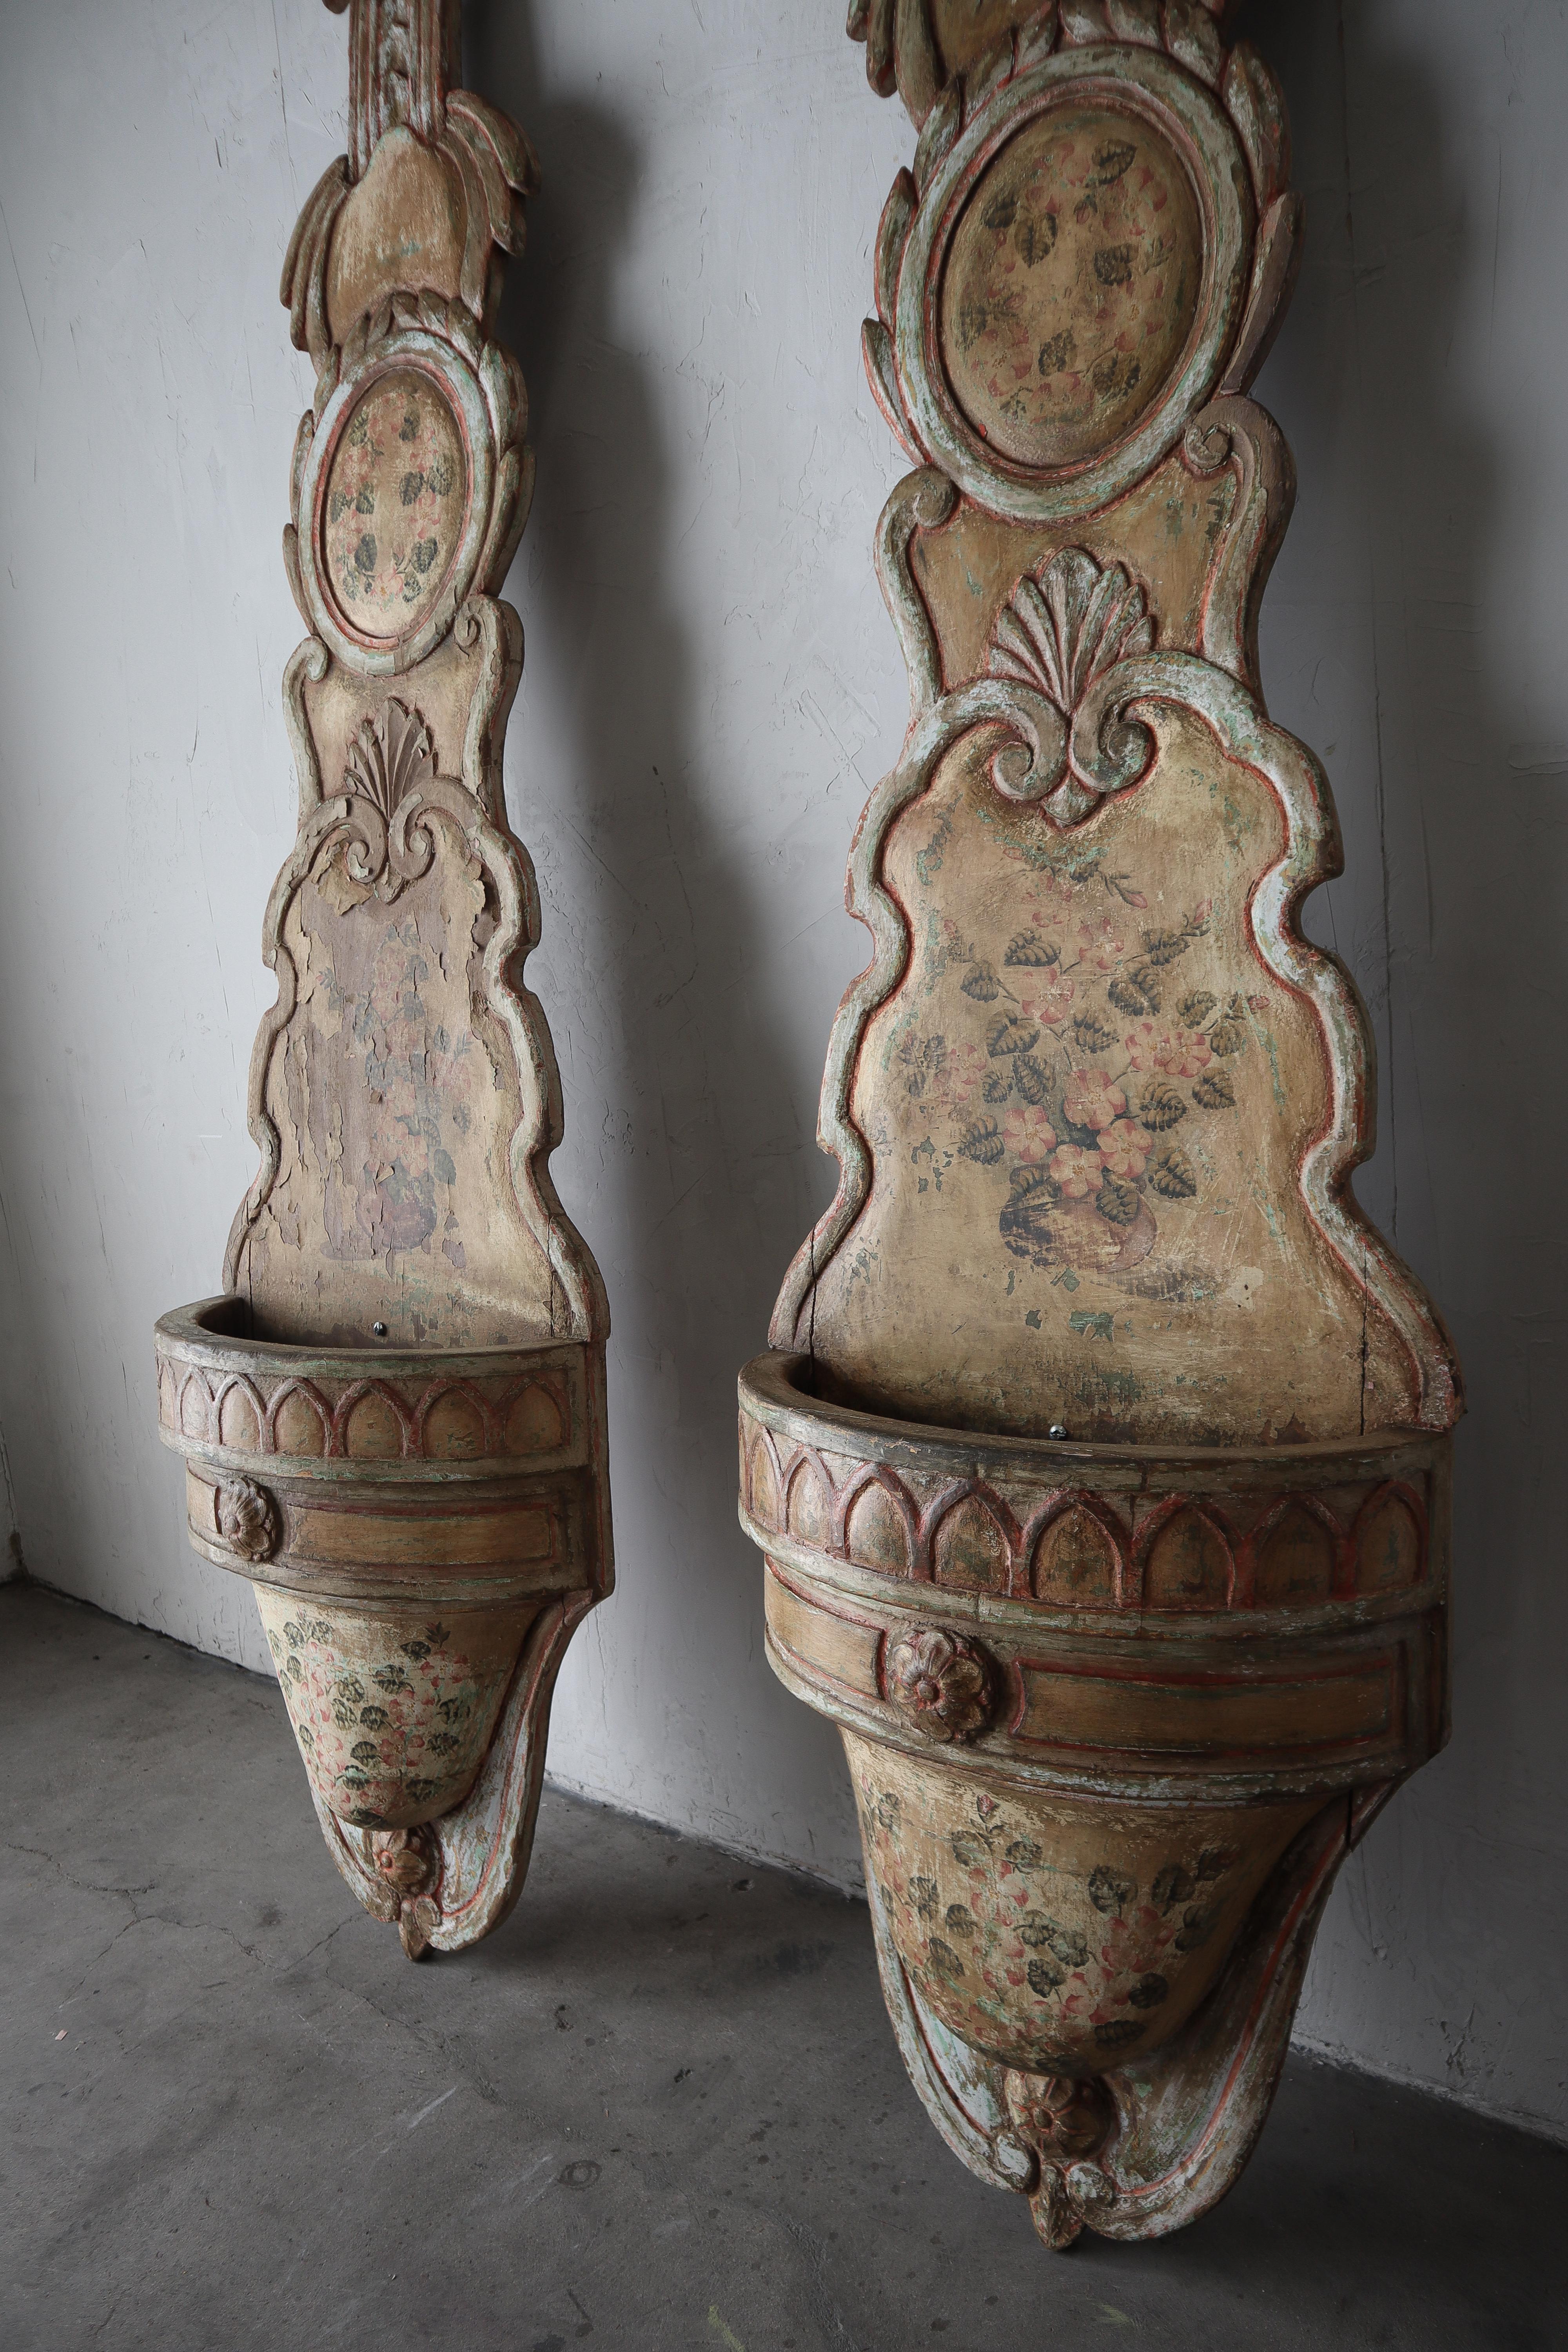 8ft Tall Pair of Antique European Wood Jardiniere Planters For Sale 5